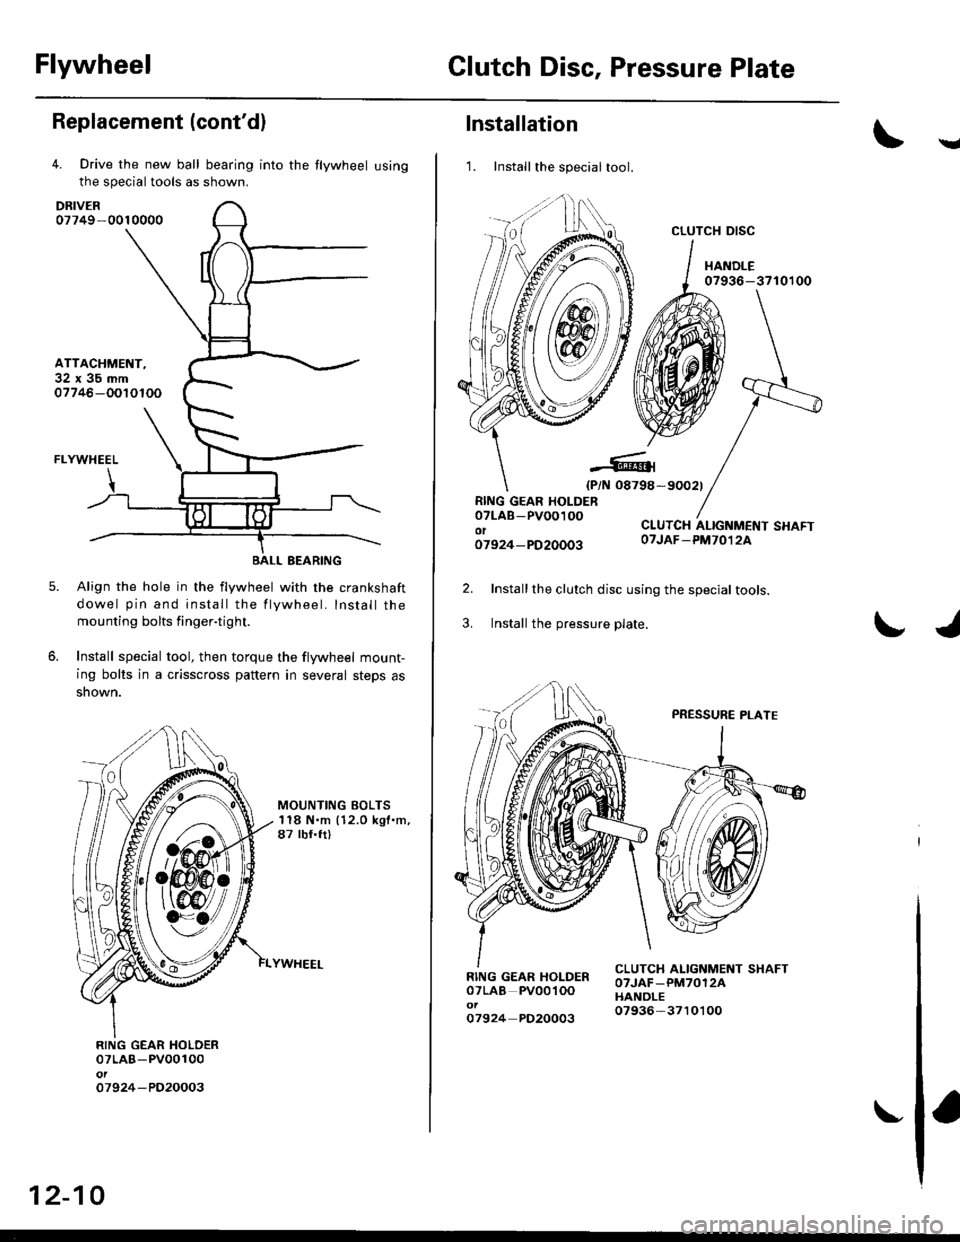 HONDA CIVIC 1996 6.G Owners Guide FlywheelClutch Disc, Pressure Plate
Replacement (contdl
4. Drive the new ball bearing into the flywheel using
the special tools as shown.
DRIVER07749-0010000
ATTACHMENT,32x35mm07746-OOIOTOO
FLYWHEEL
